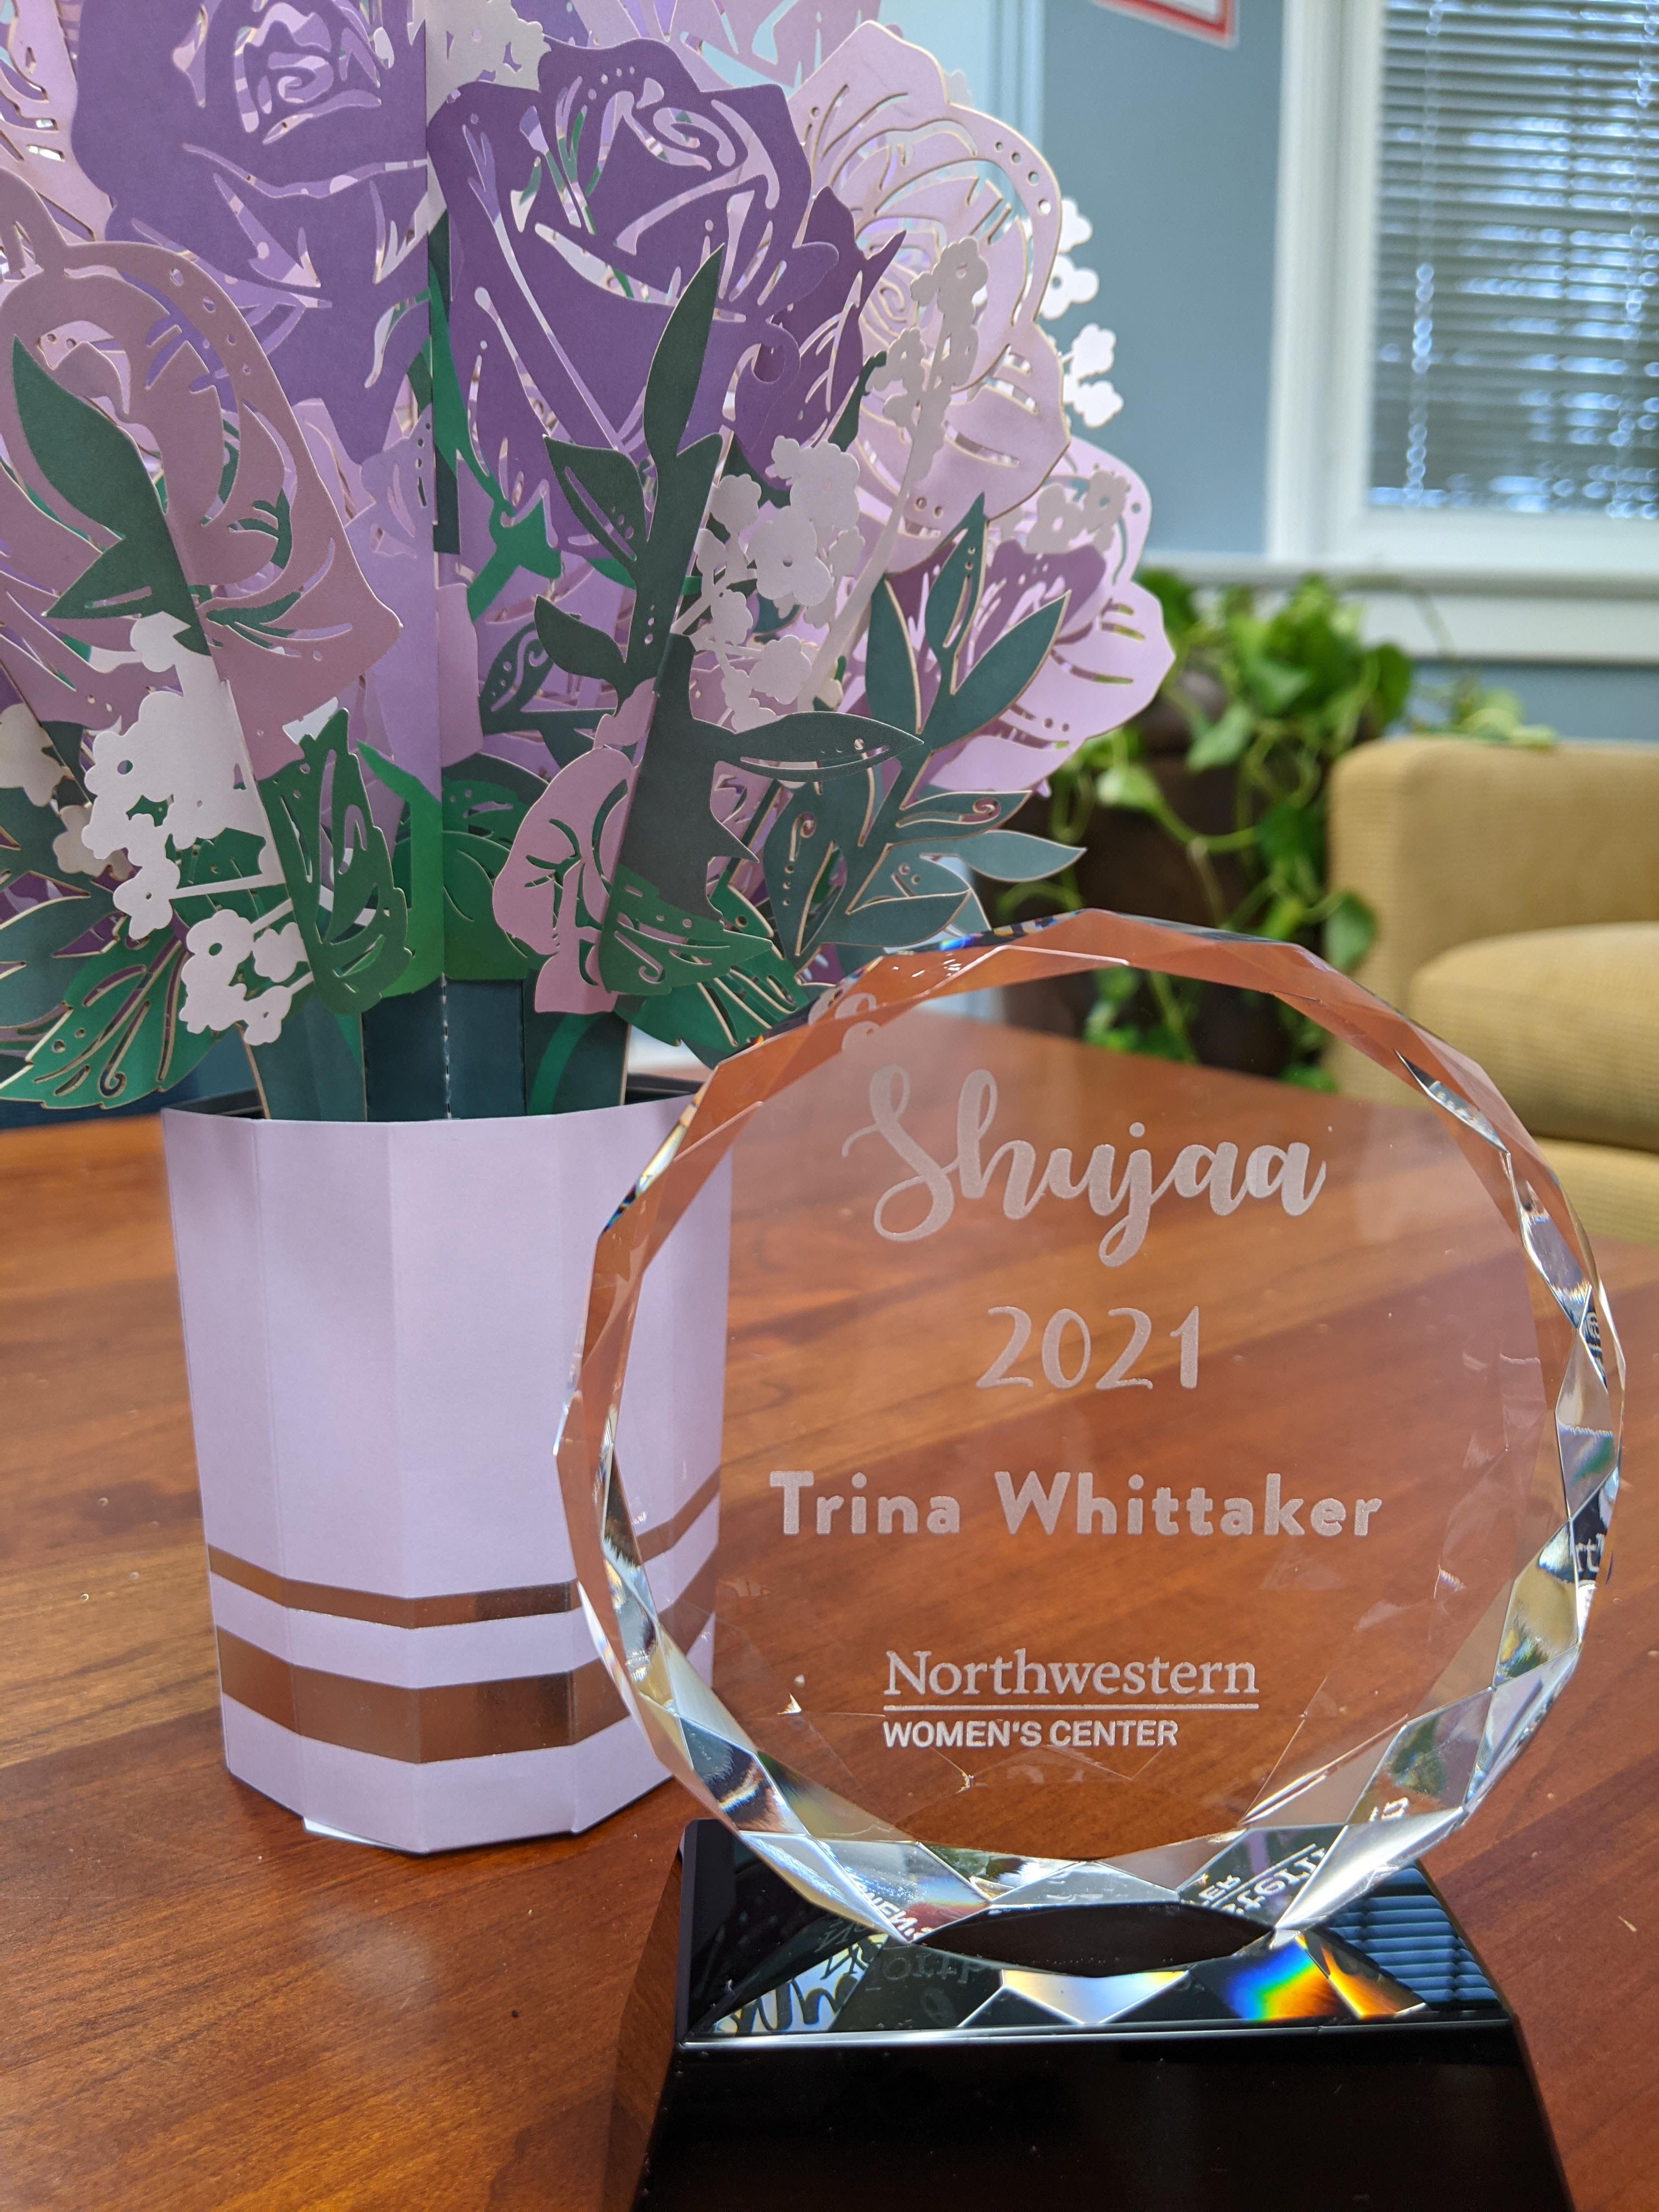 glass award on a table with paper flowers. Award texts is: shujaa 2021, Trina Whittaker. Northwestern Women's Center